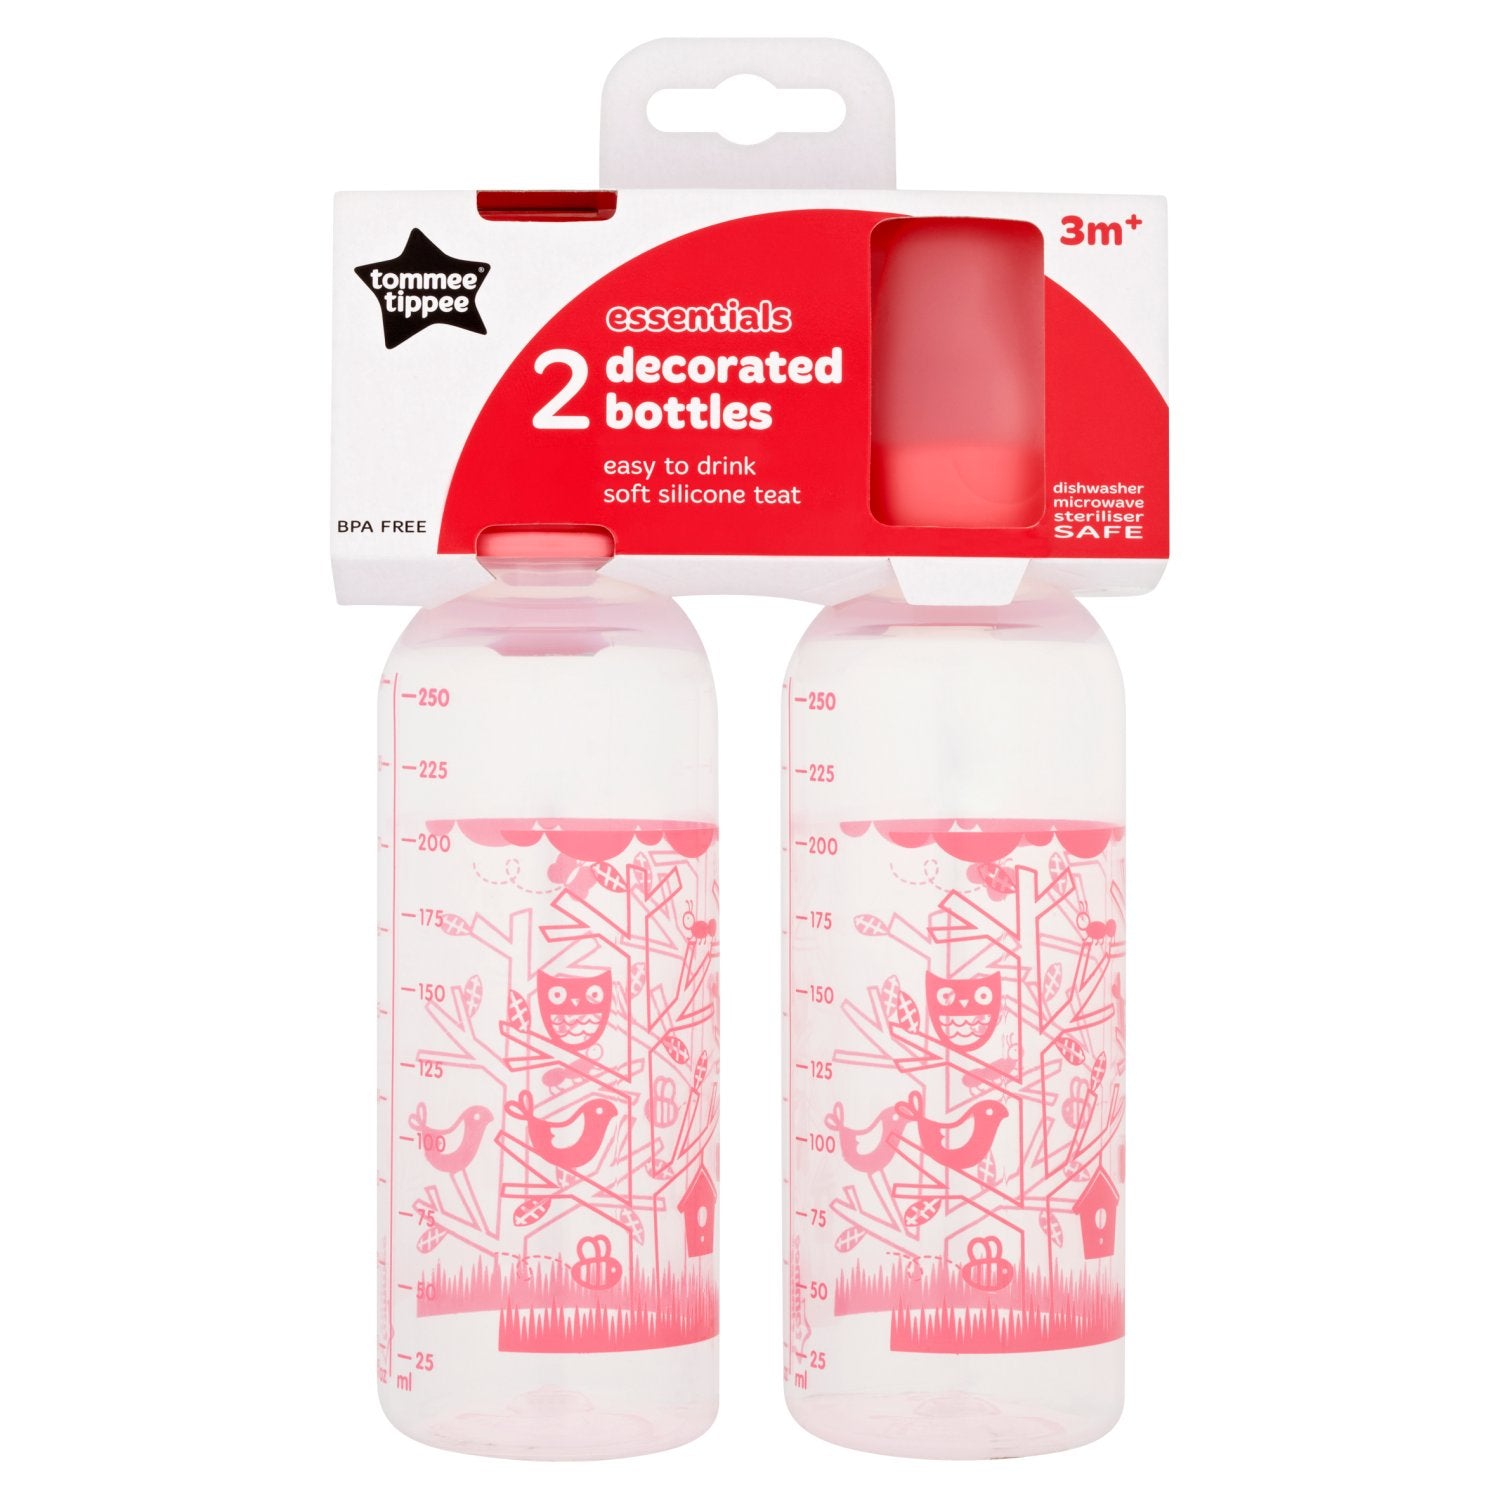 TOMMEE TIPPEE DECORATED BOTTLES - 2 BOTTLES